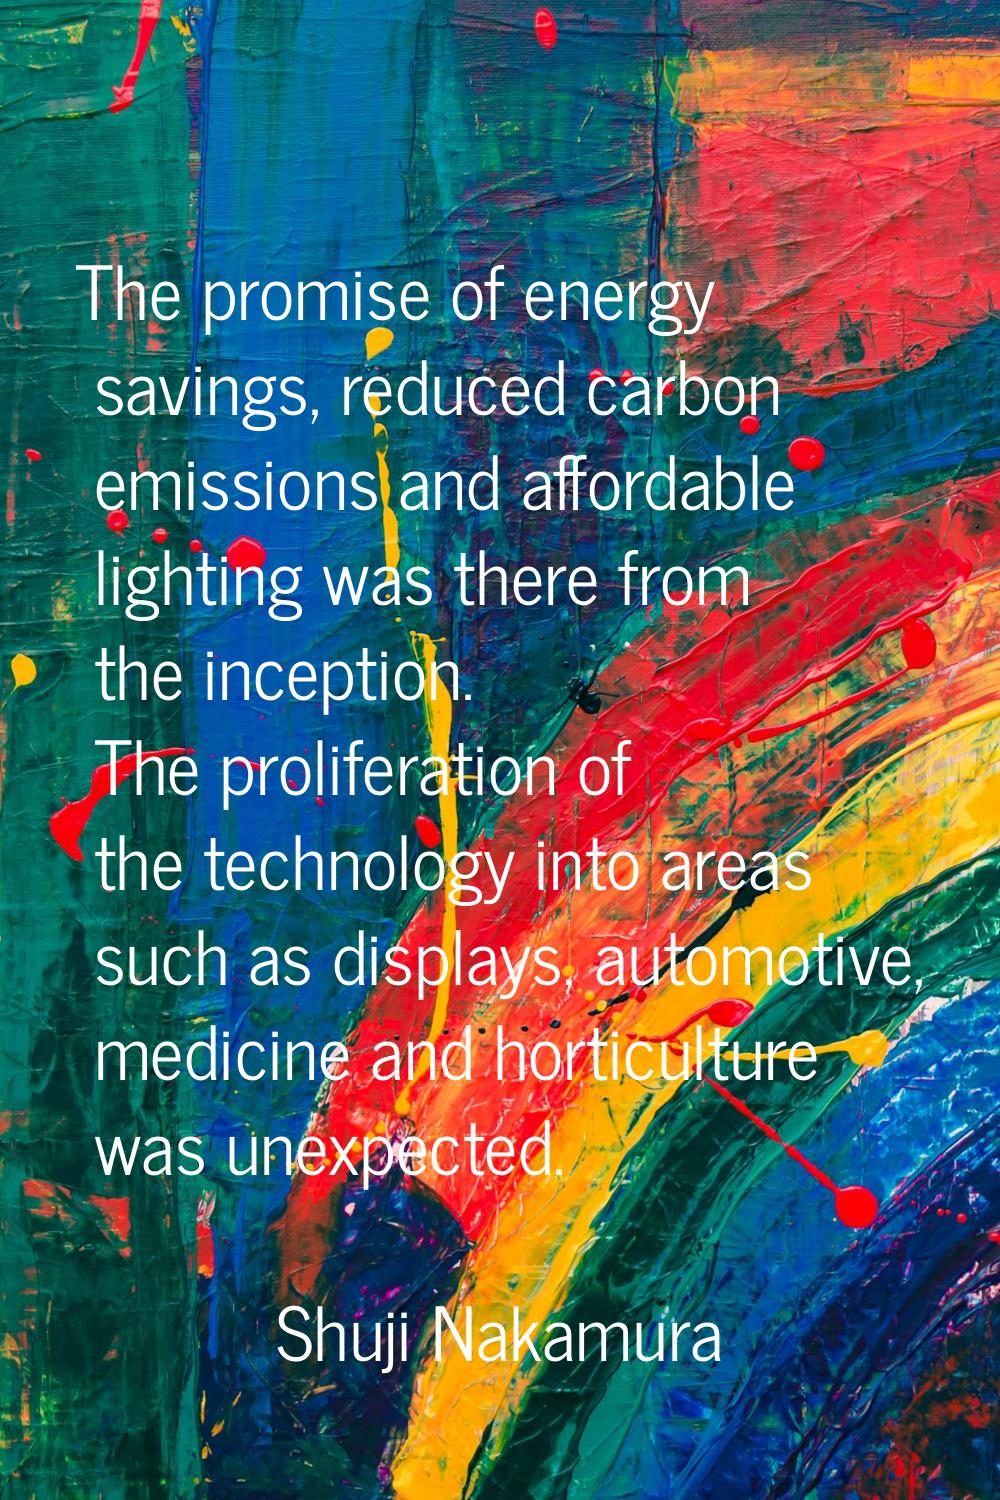 The promise of energy savings, reduced carbon emissions and affordable lighting was there from the 